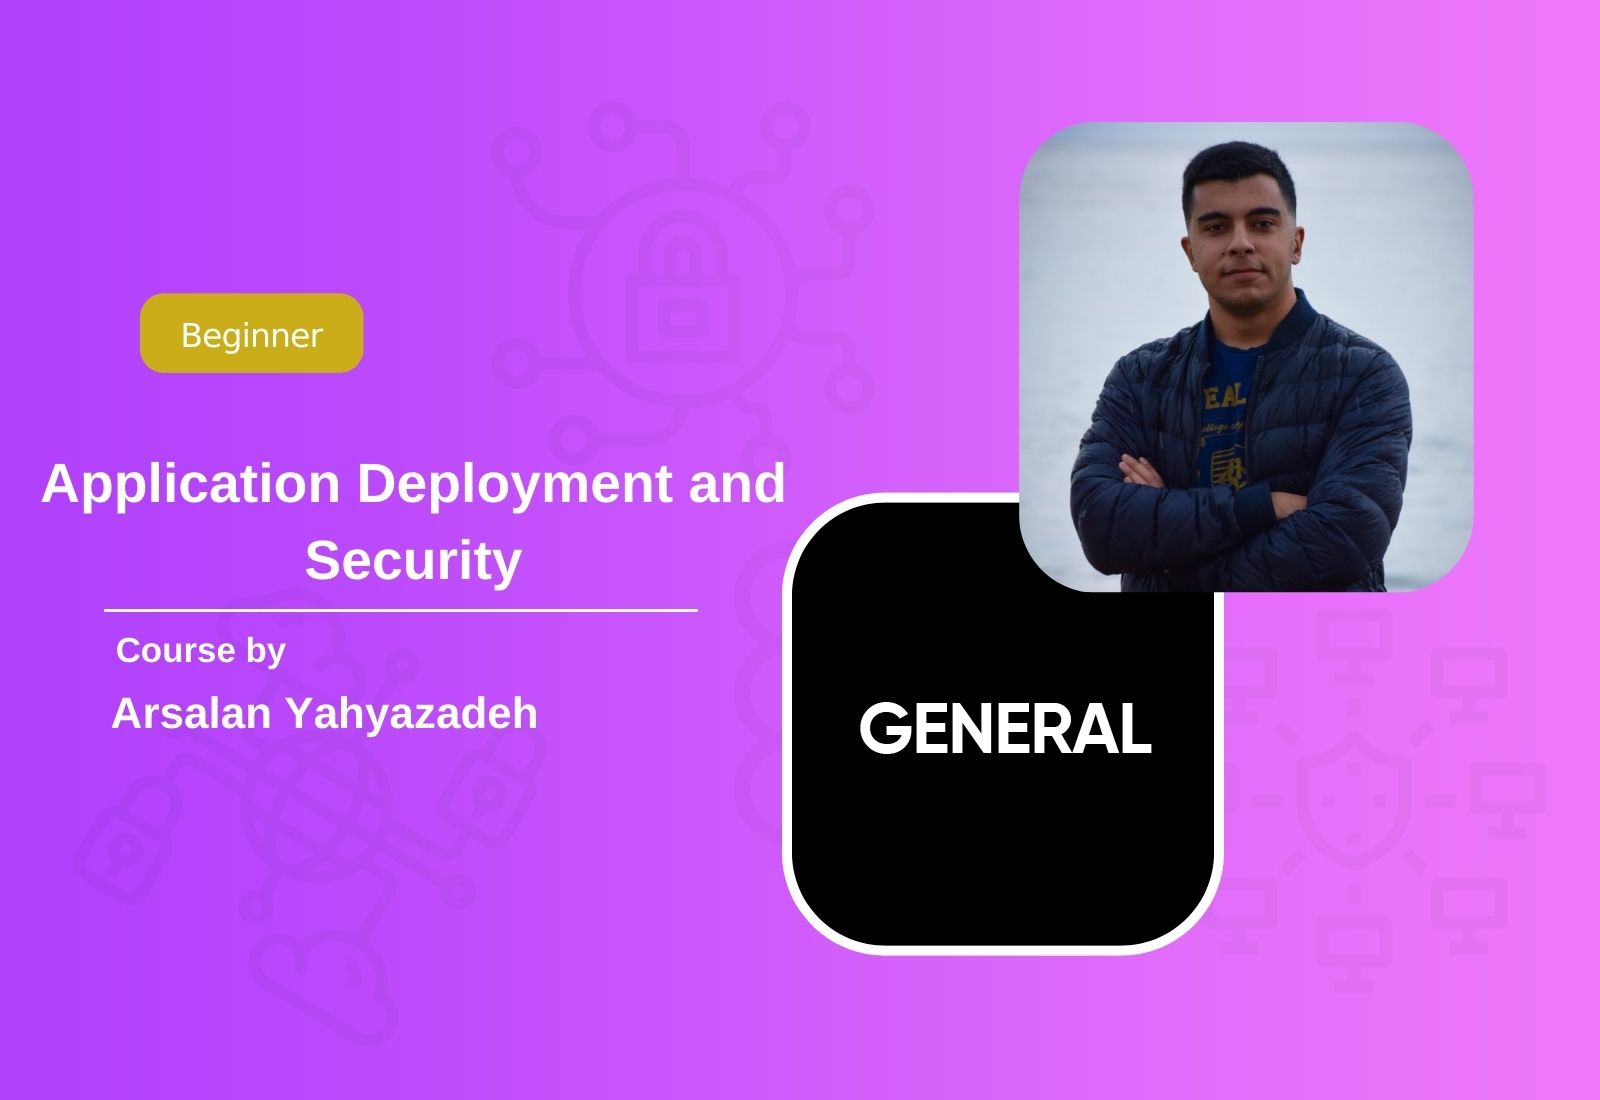 Application Deployment and Security